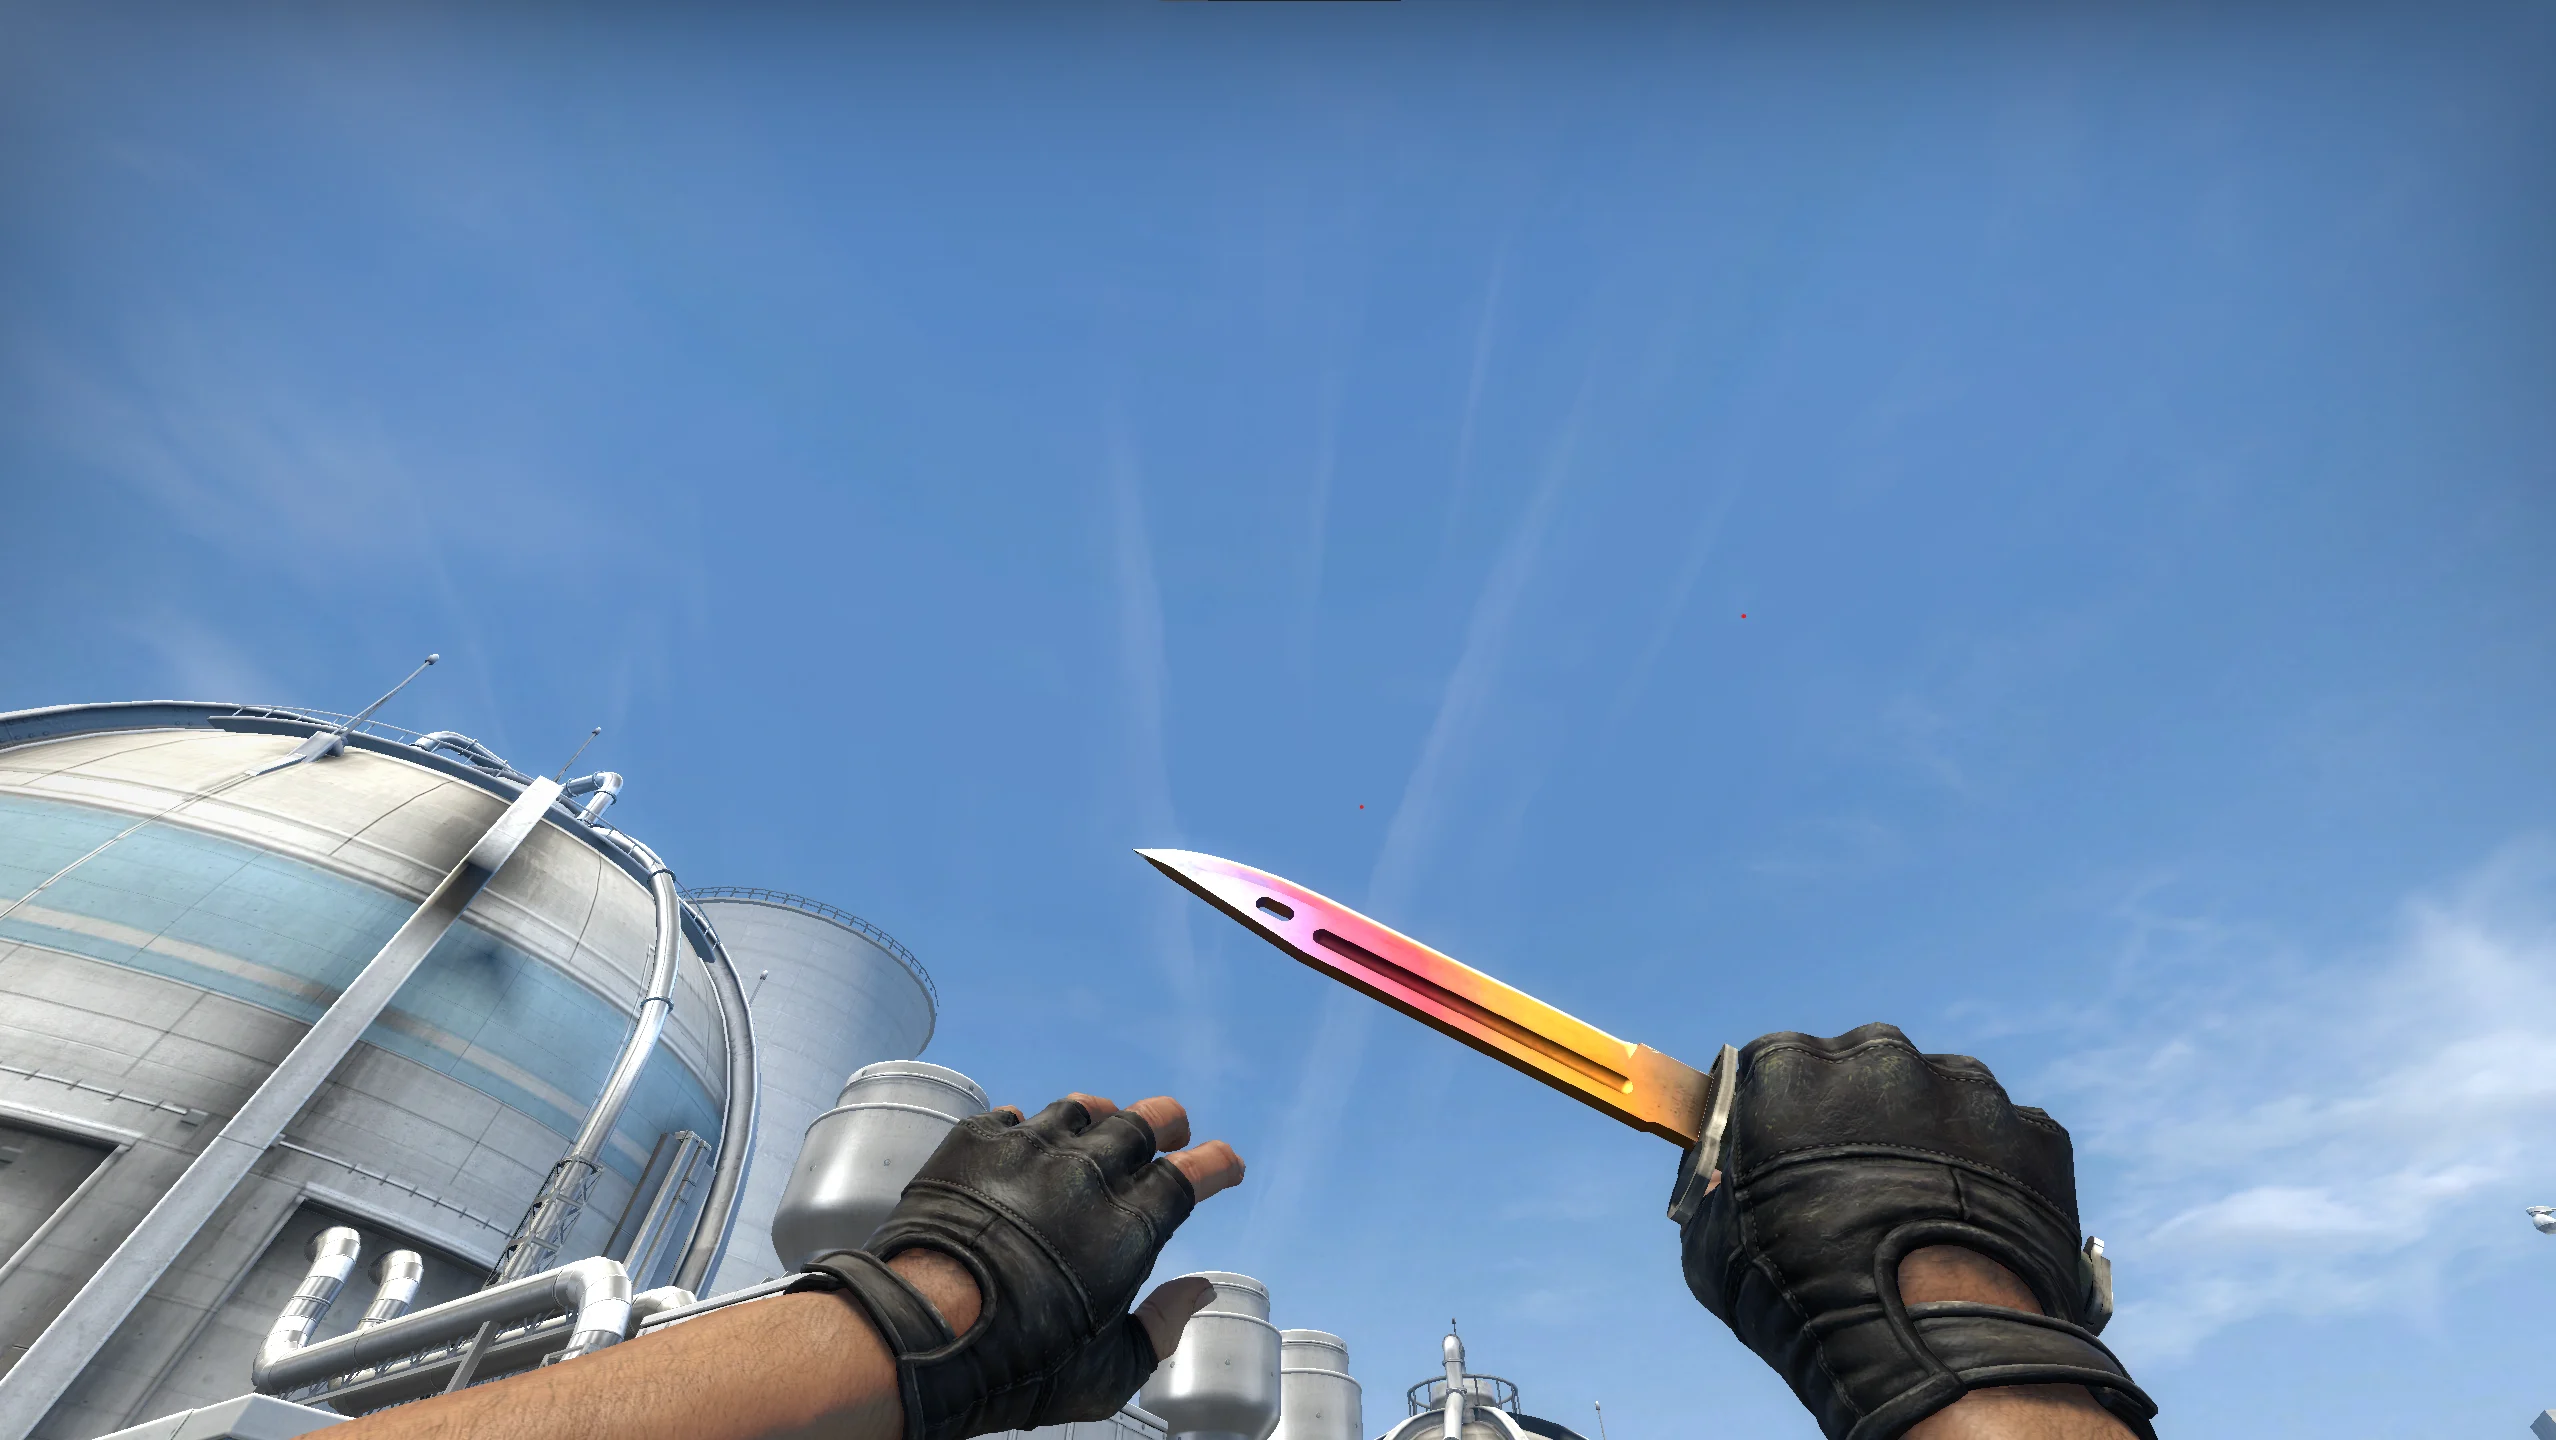 Bayonet Fade, pattern index 763 (100% Fade, highest percentage possible)